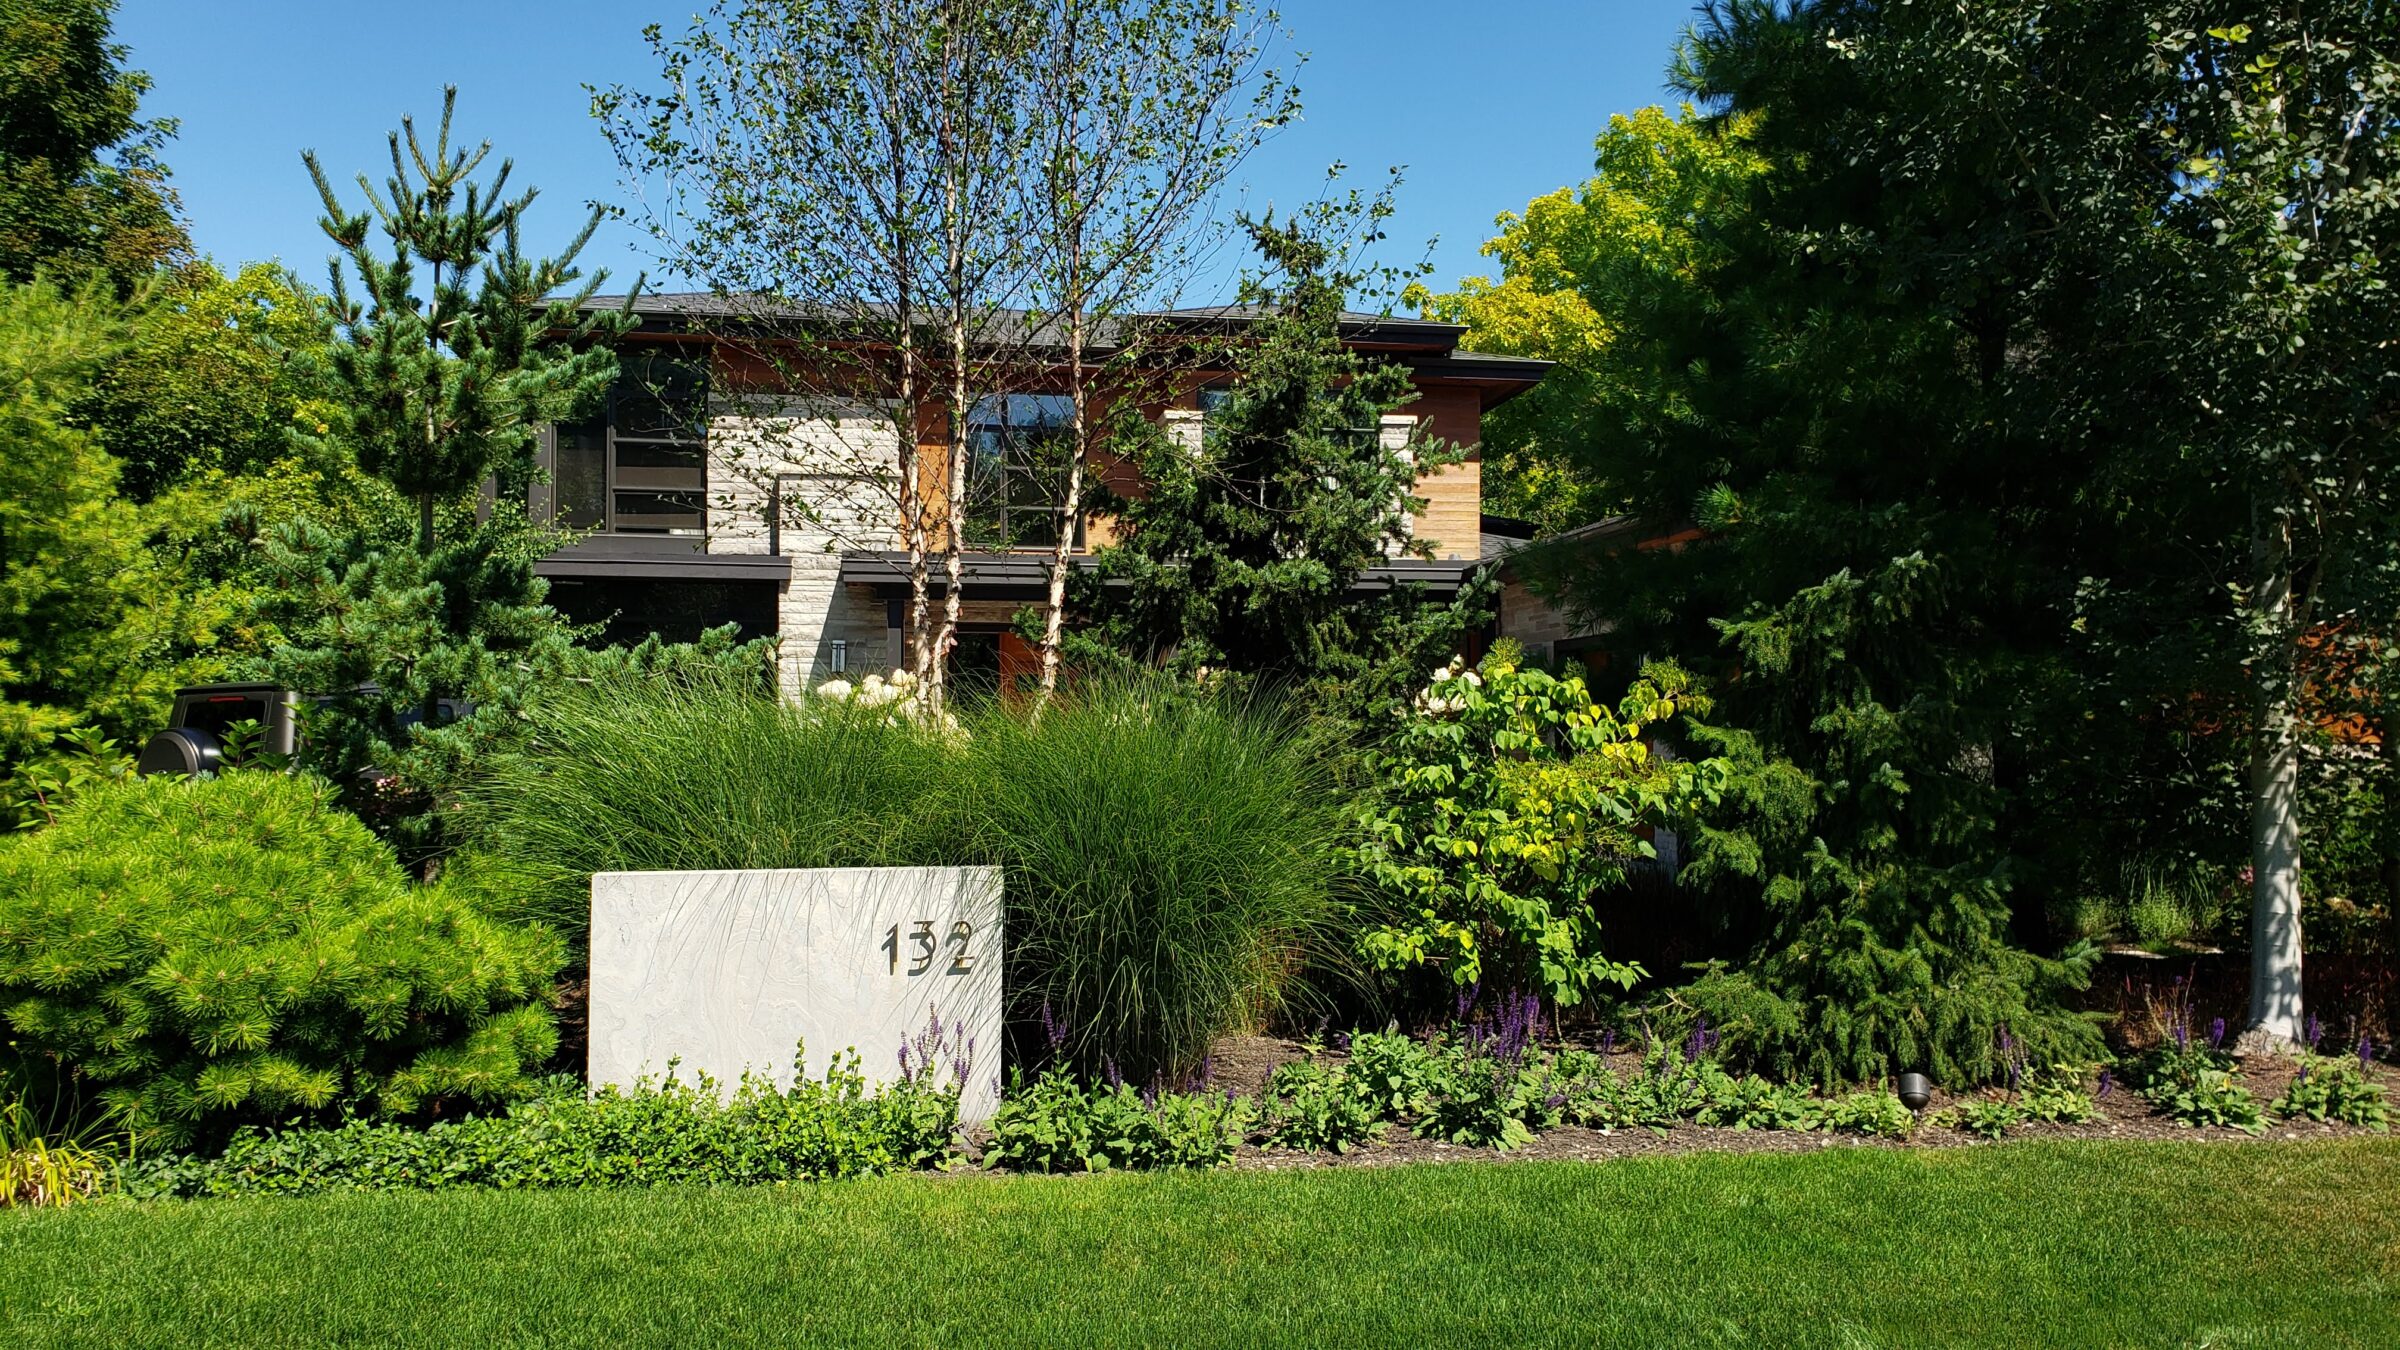 A lush garden with various plants and trees in front of a modern house obscured by foliage. A prominent number "132" displayed on a stone panel.